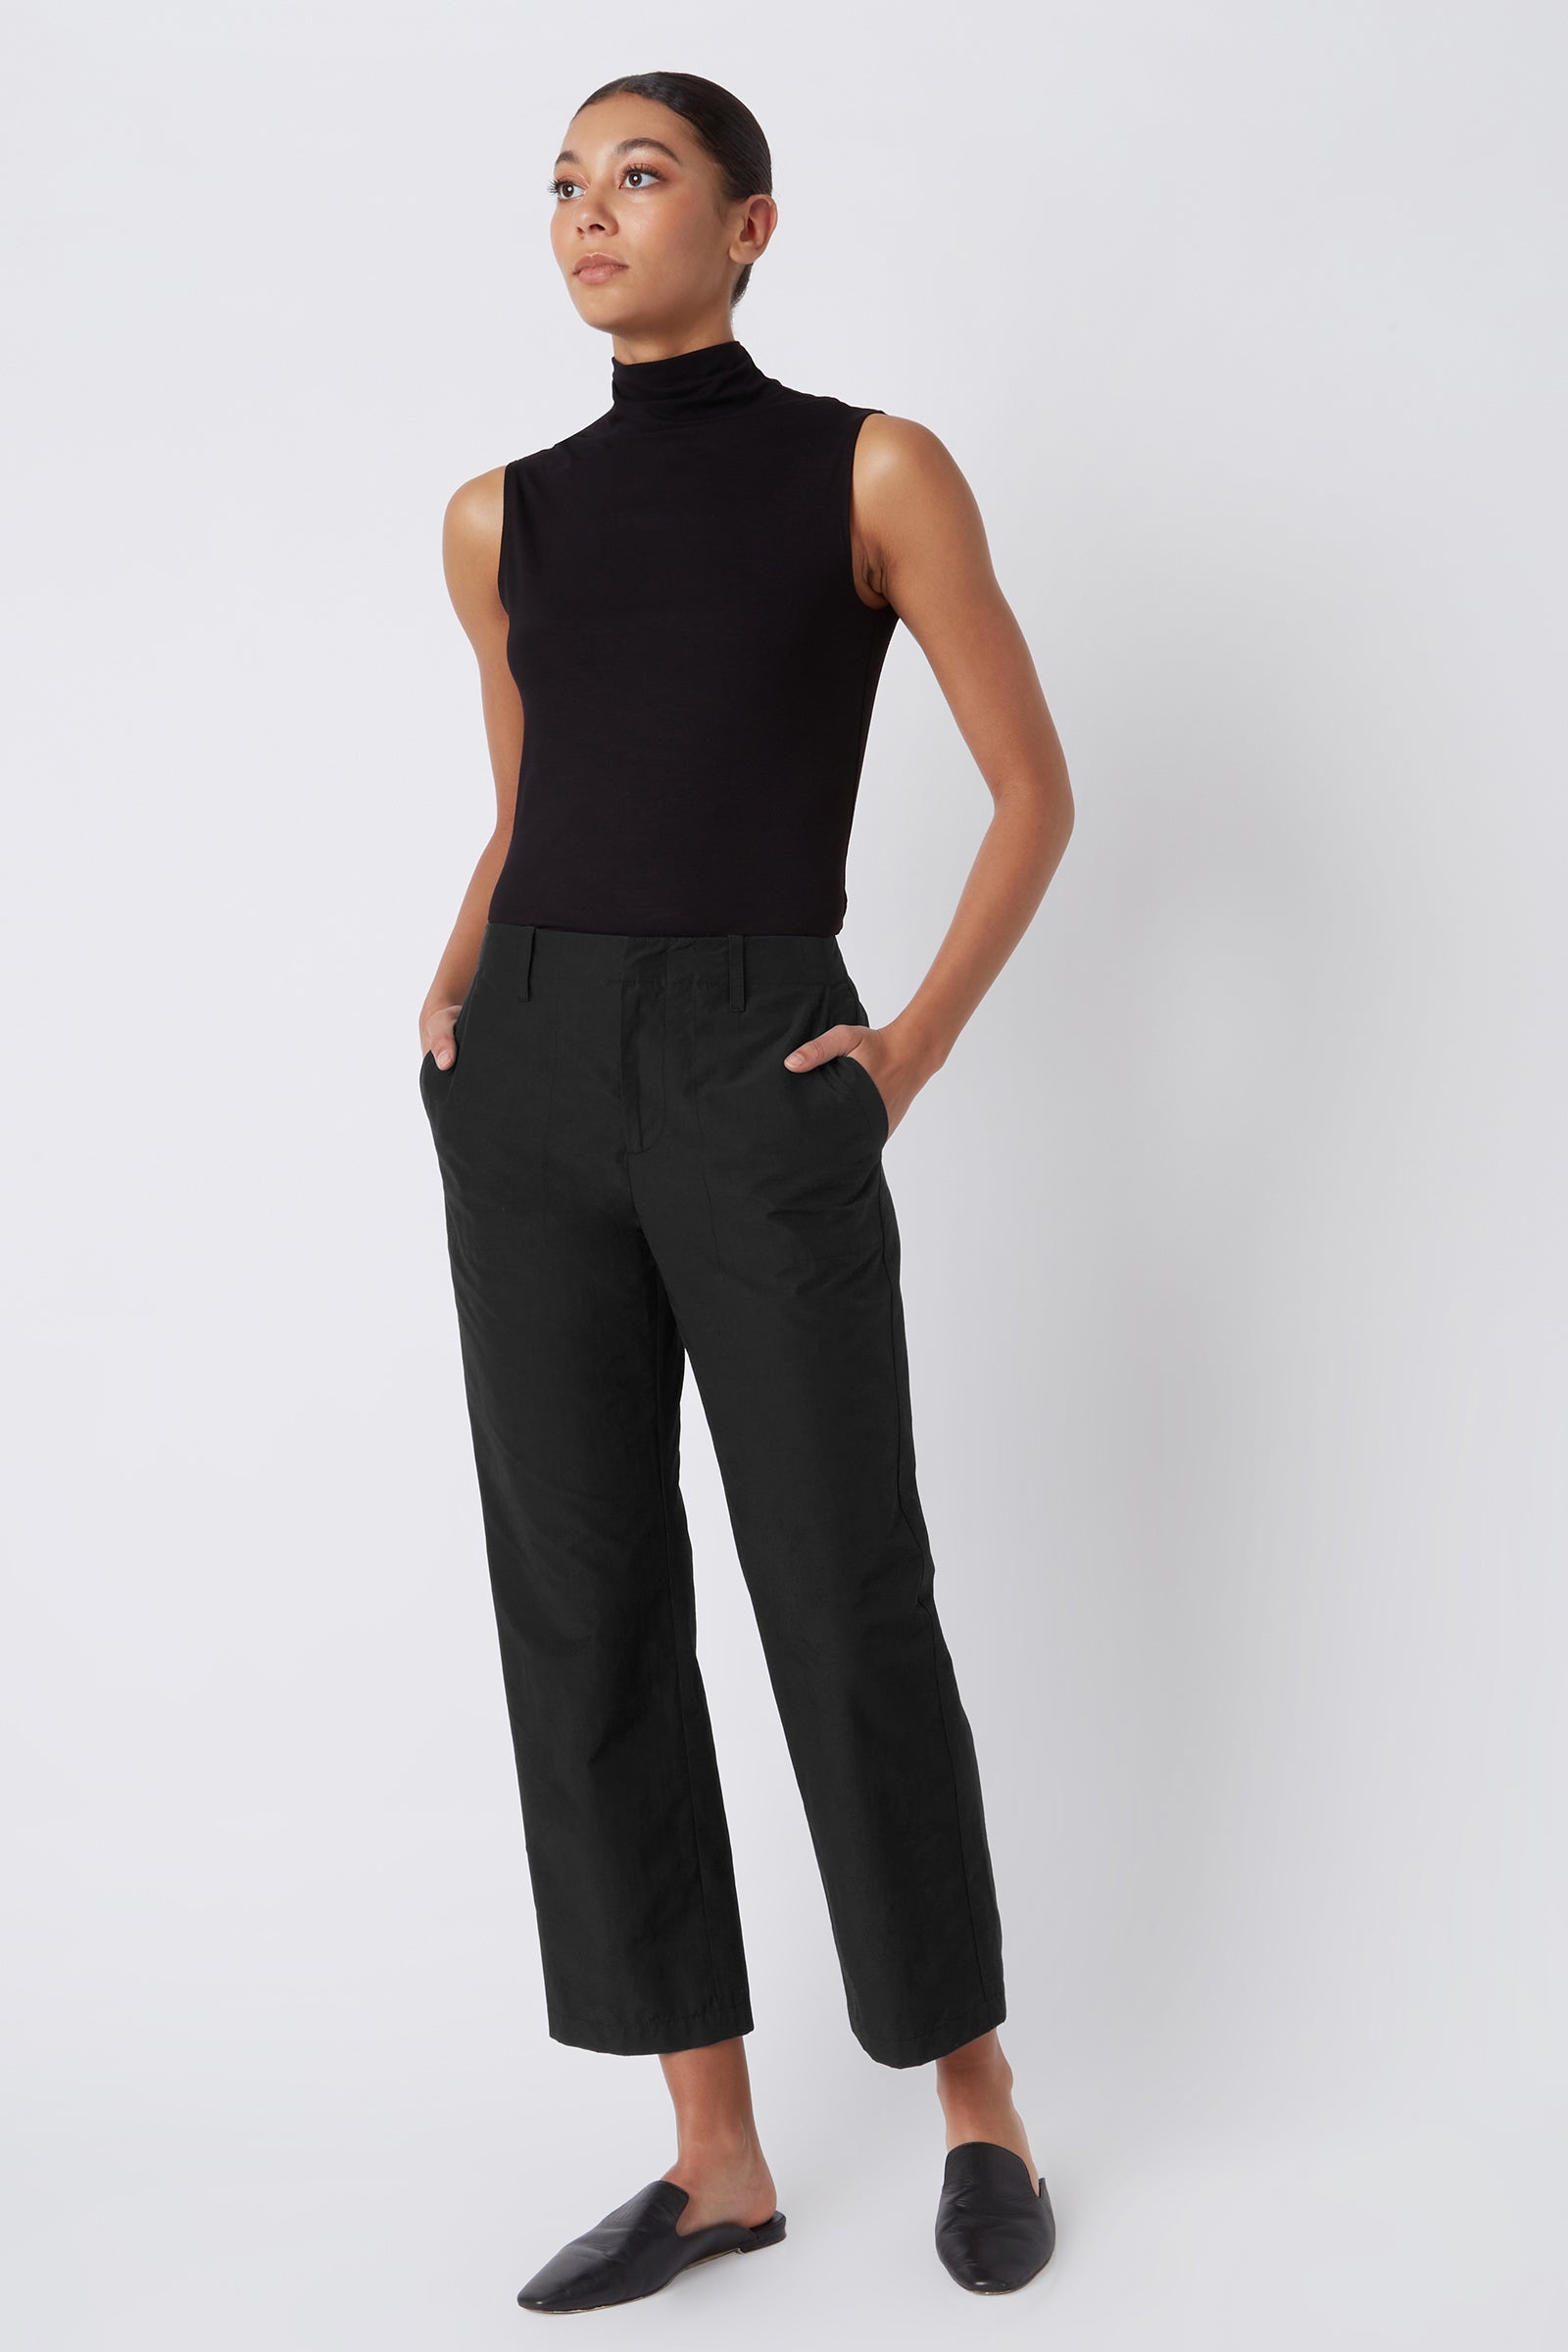 Kal Rieman Brit Crop Pant in Black on Model Gazing Out Full Front View